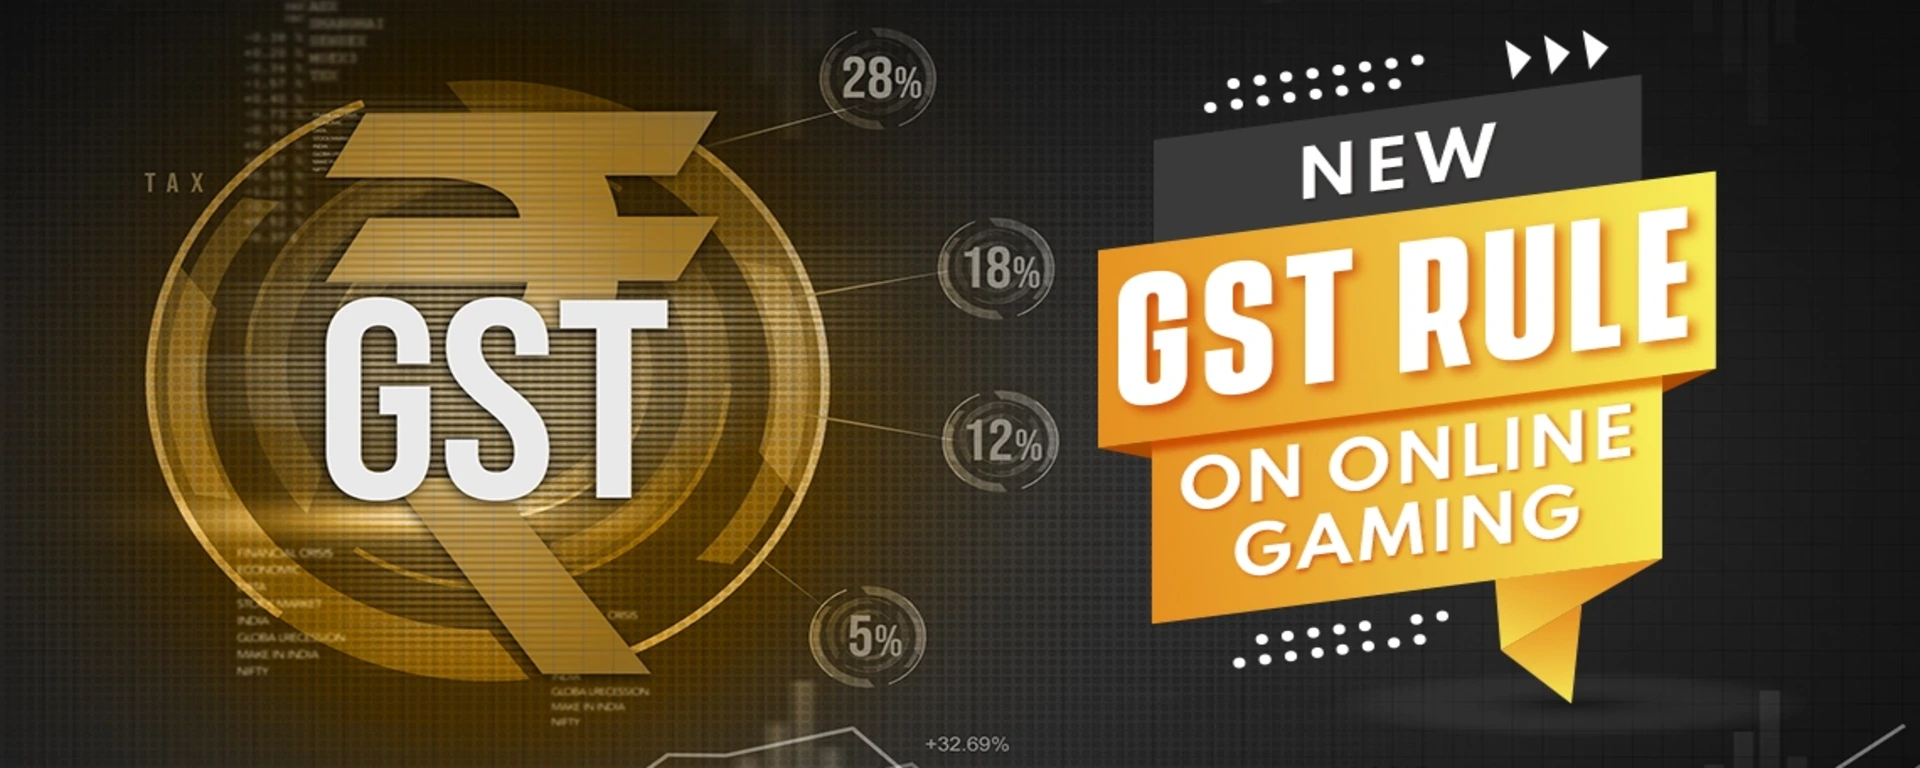 New GST Rule on Online Gaming : All You Need To Know